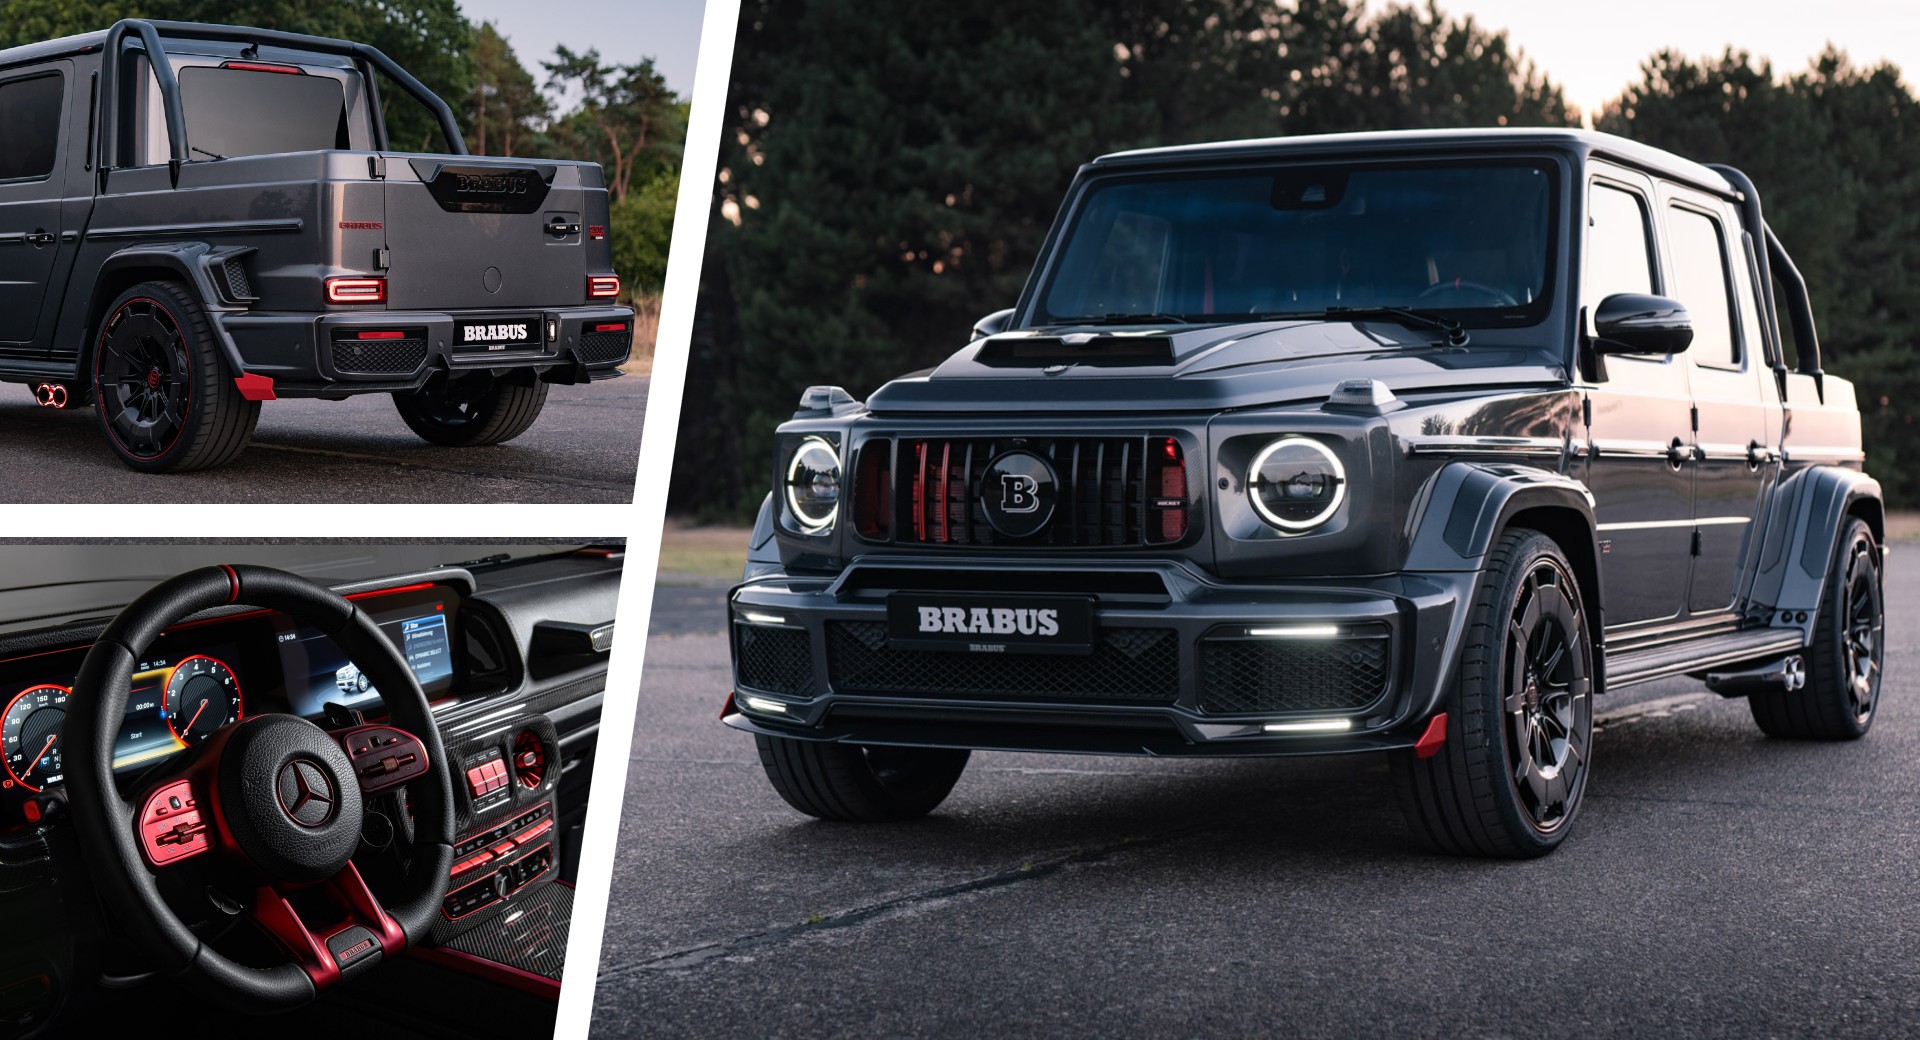 New Brabus P 900 Rocket Edition Is An Insane GWagen Pickup Truck With